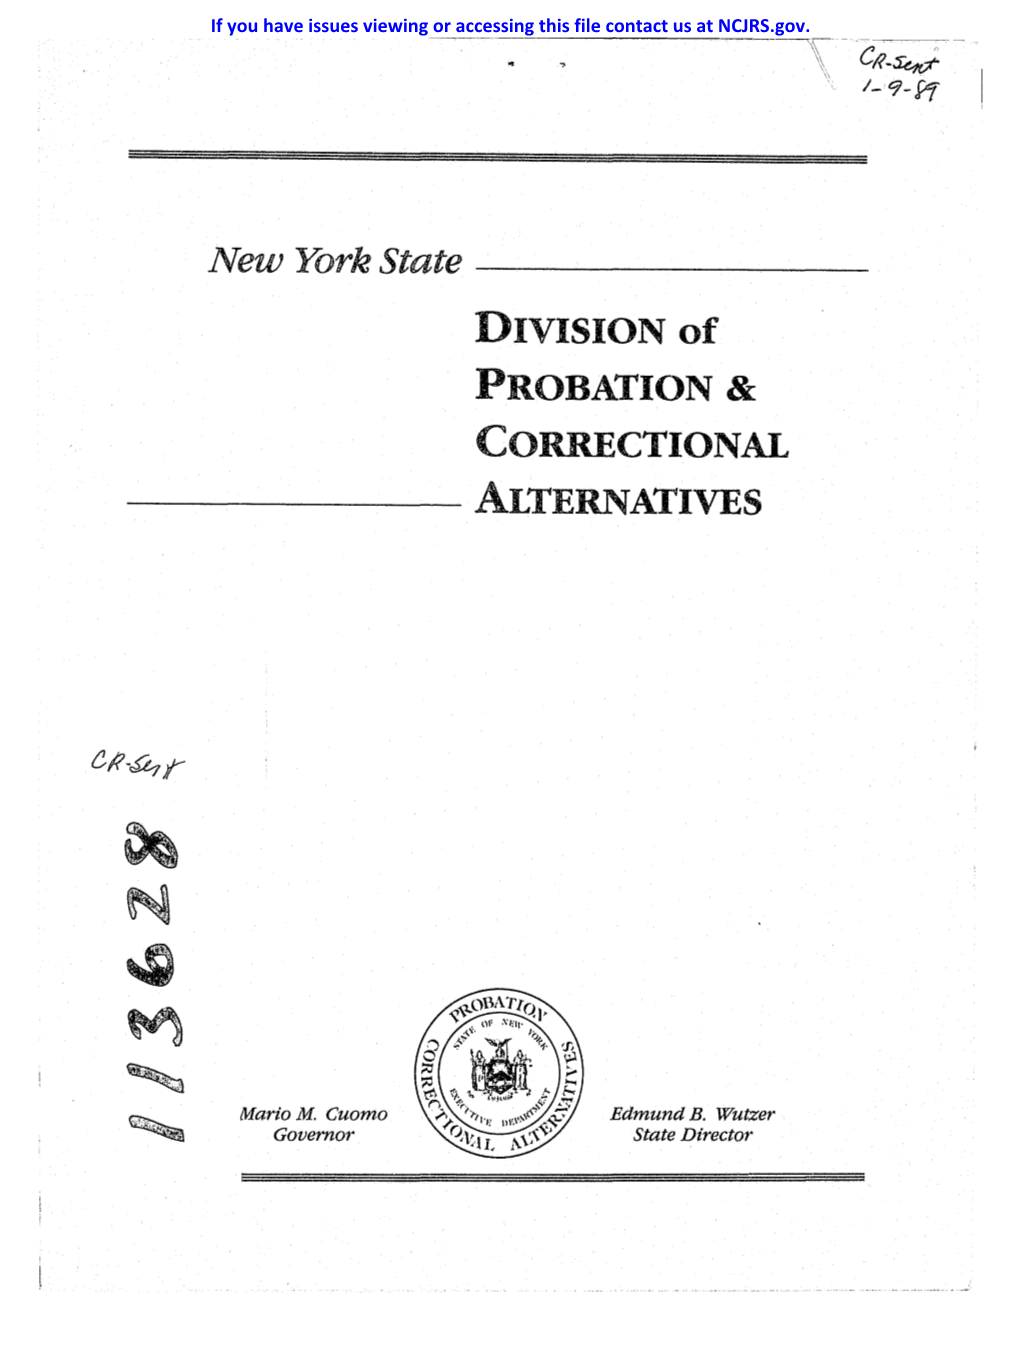 New York State ------DIVISION of PROBATION & CORRECTIONAL ------ALTERNATIVES